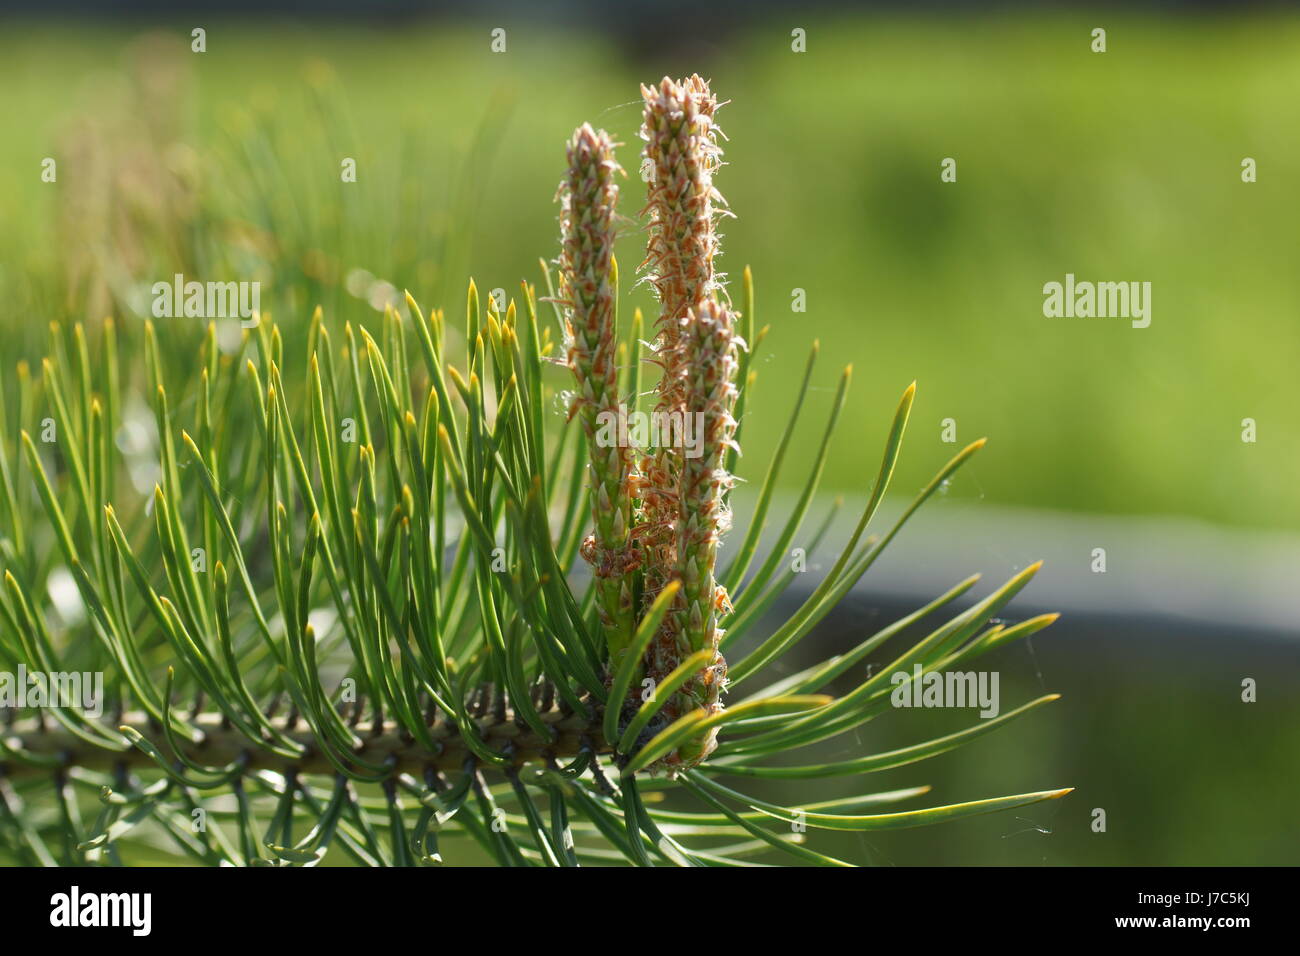 Shoots of pine. Scots pine, Pinus sylvestris. The new spring shoots are sometimes called 'candles'. Stock Photo